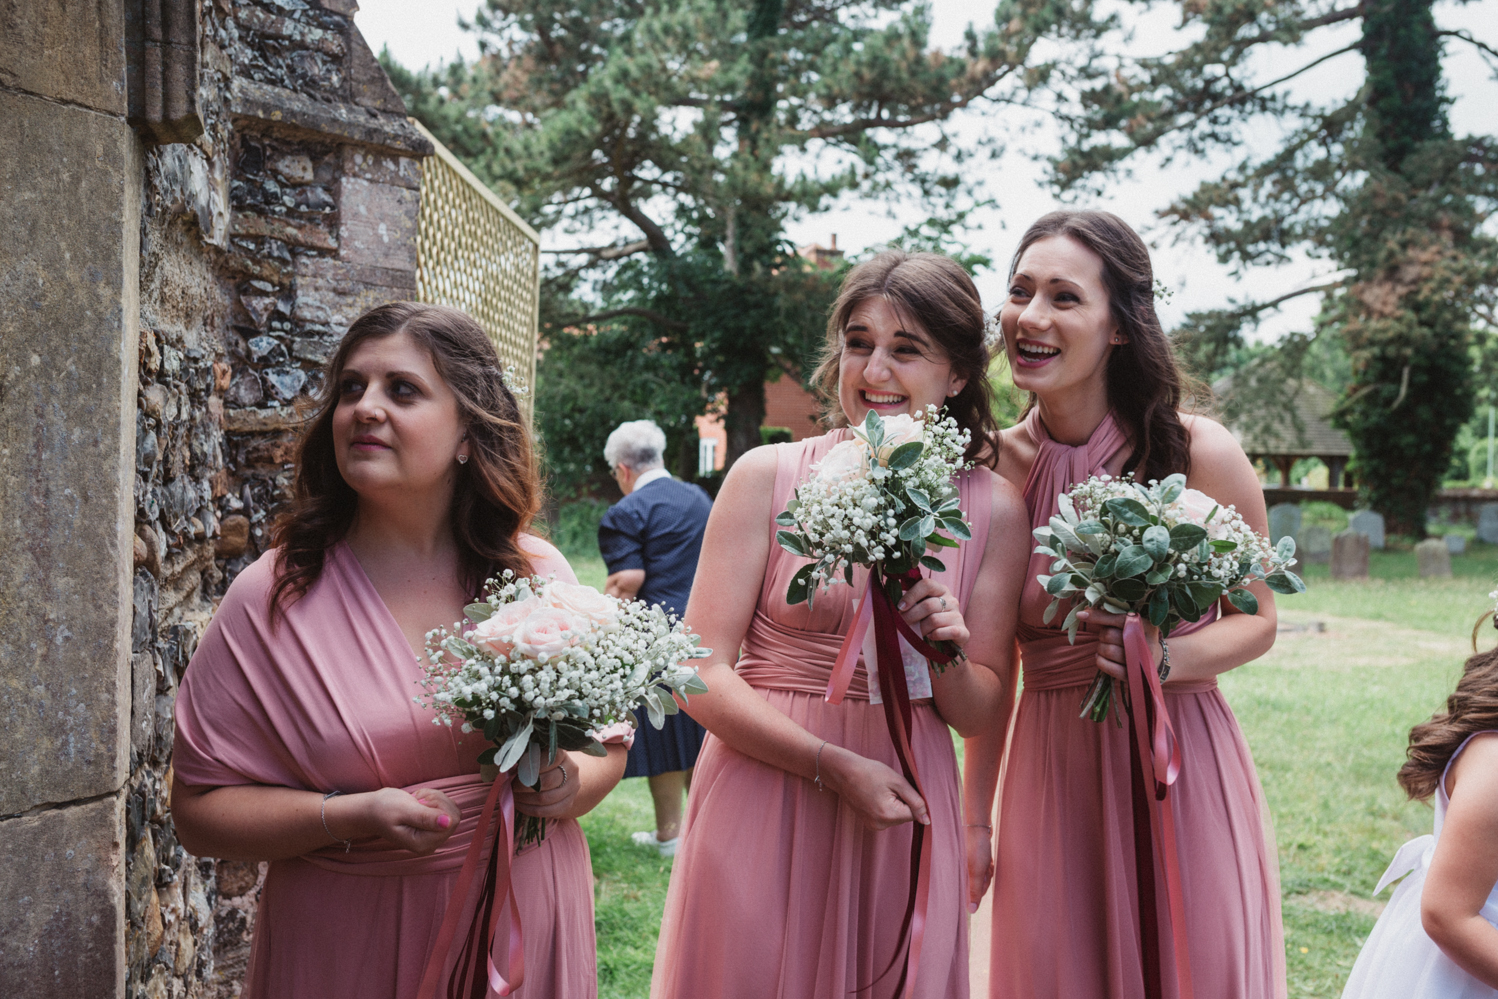 photography of relaxed wedding ceremony at worlingham church, suffolk